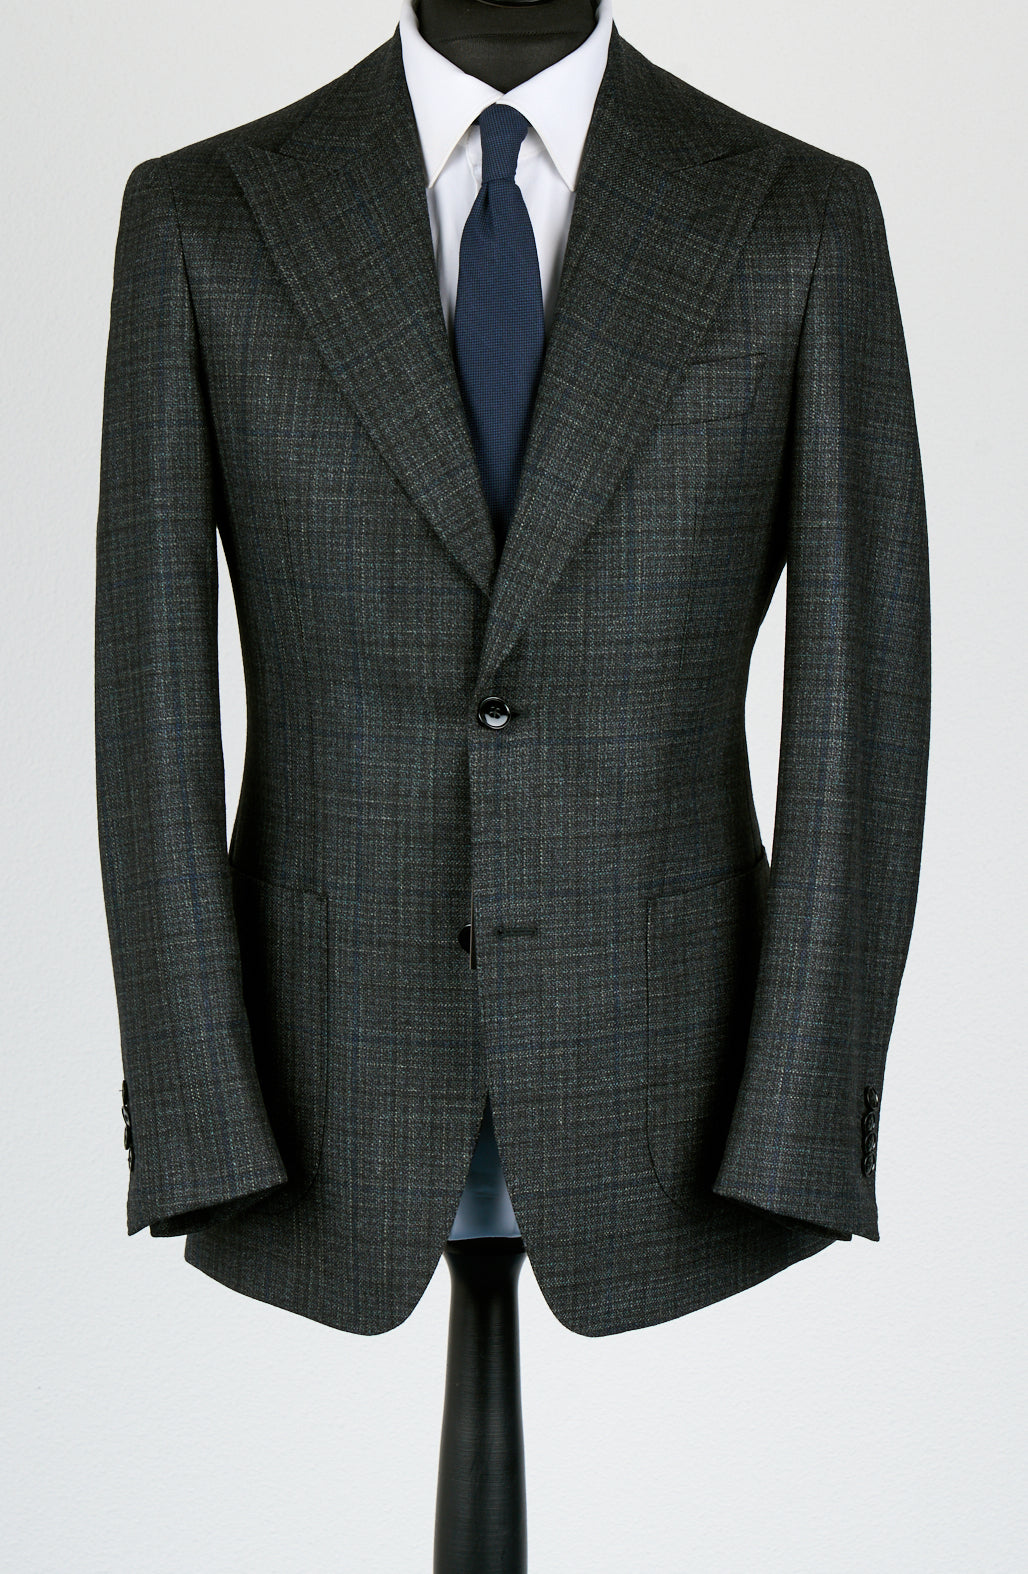 New SUITREVIEW Elmhurst Evergreen Blue Check Wool, Silk, Cashmere Wide Peak Blazer - Size 38R and 40R